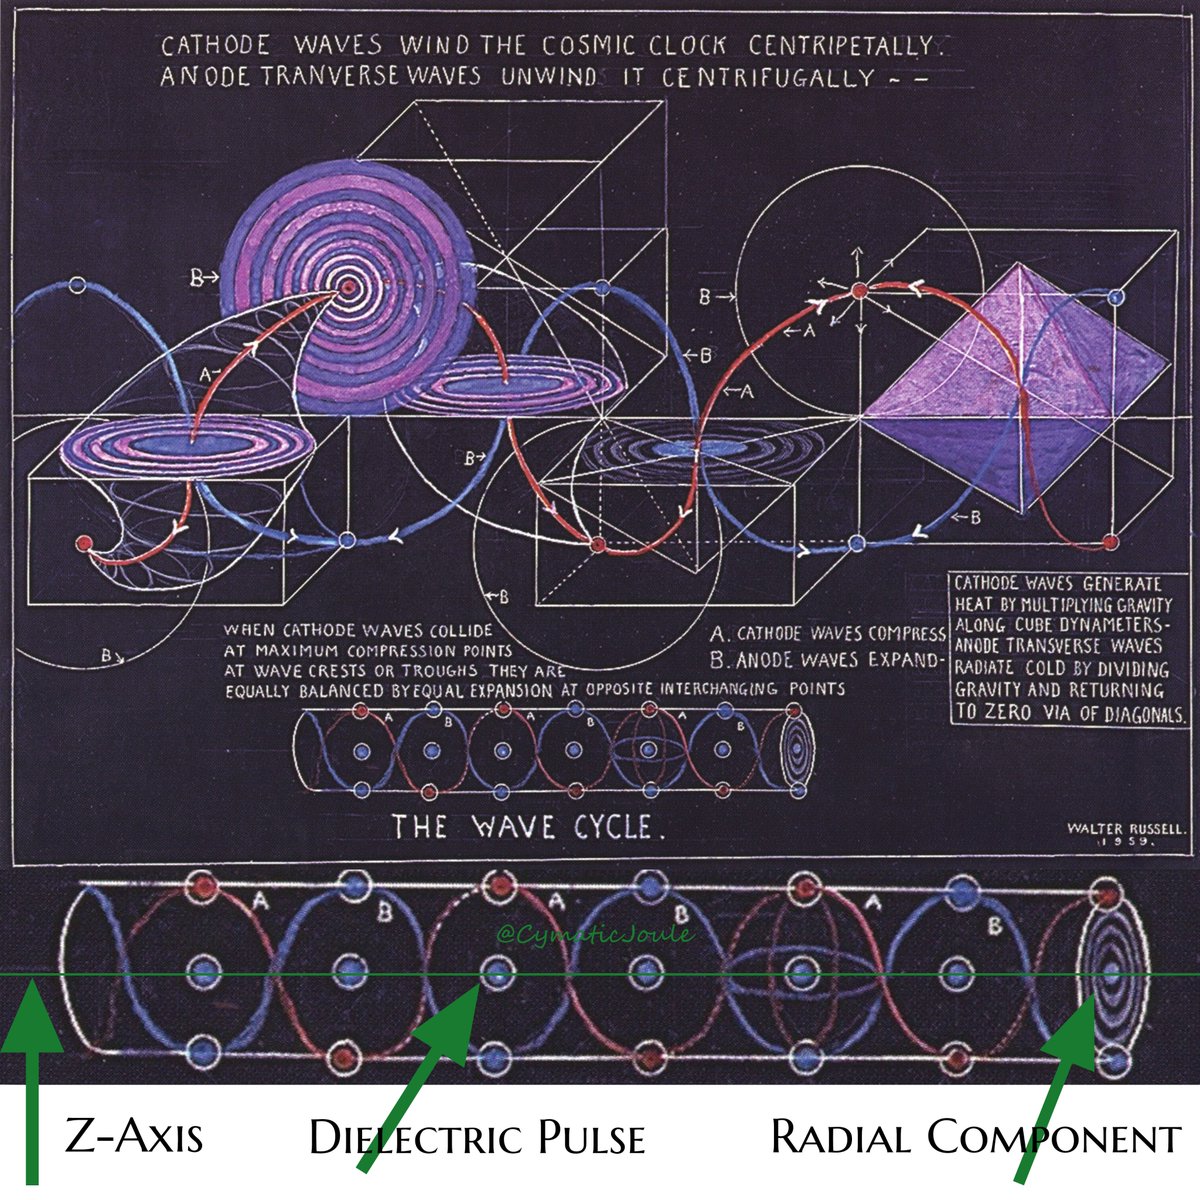 Walter Russell glimpsed mechanics of cosmos and did superb job illustrating. Ken Wheeler, explains mechanics of light showing what is being gate-kept from our education is the Z-axis dielectric pulse radial component, ie heartbeat of God, ie the cosmic breath that sustains life.